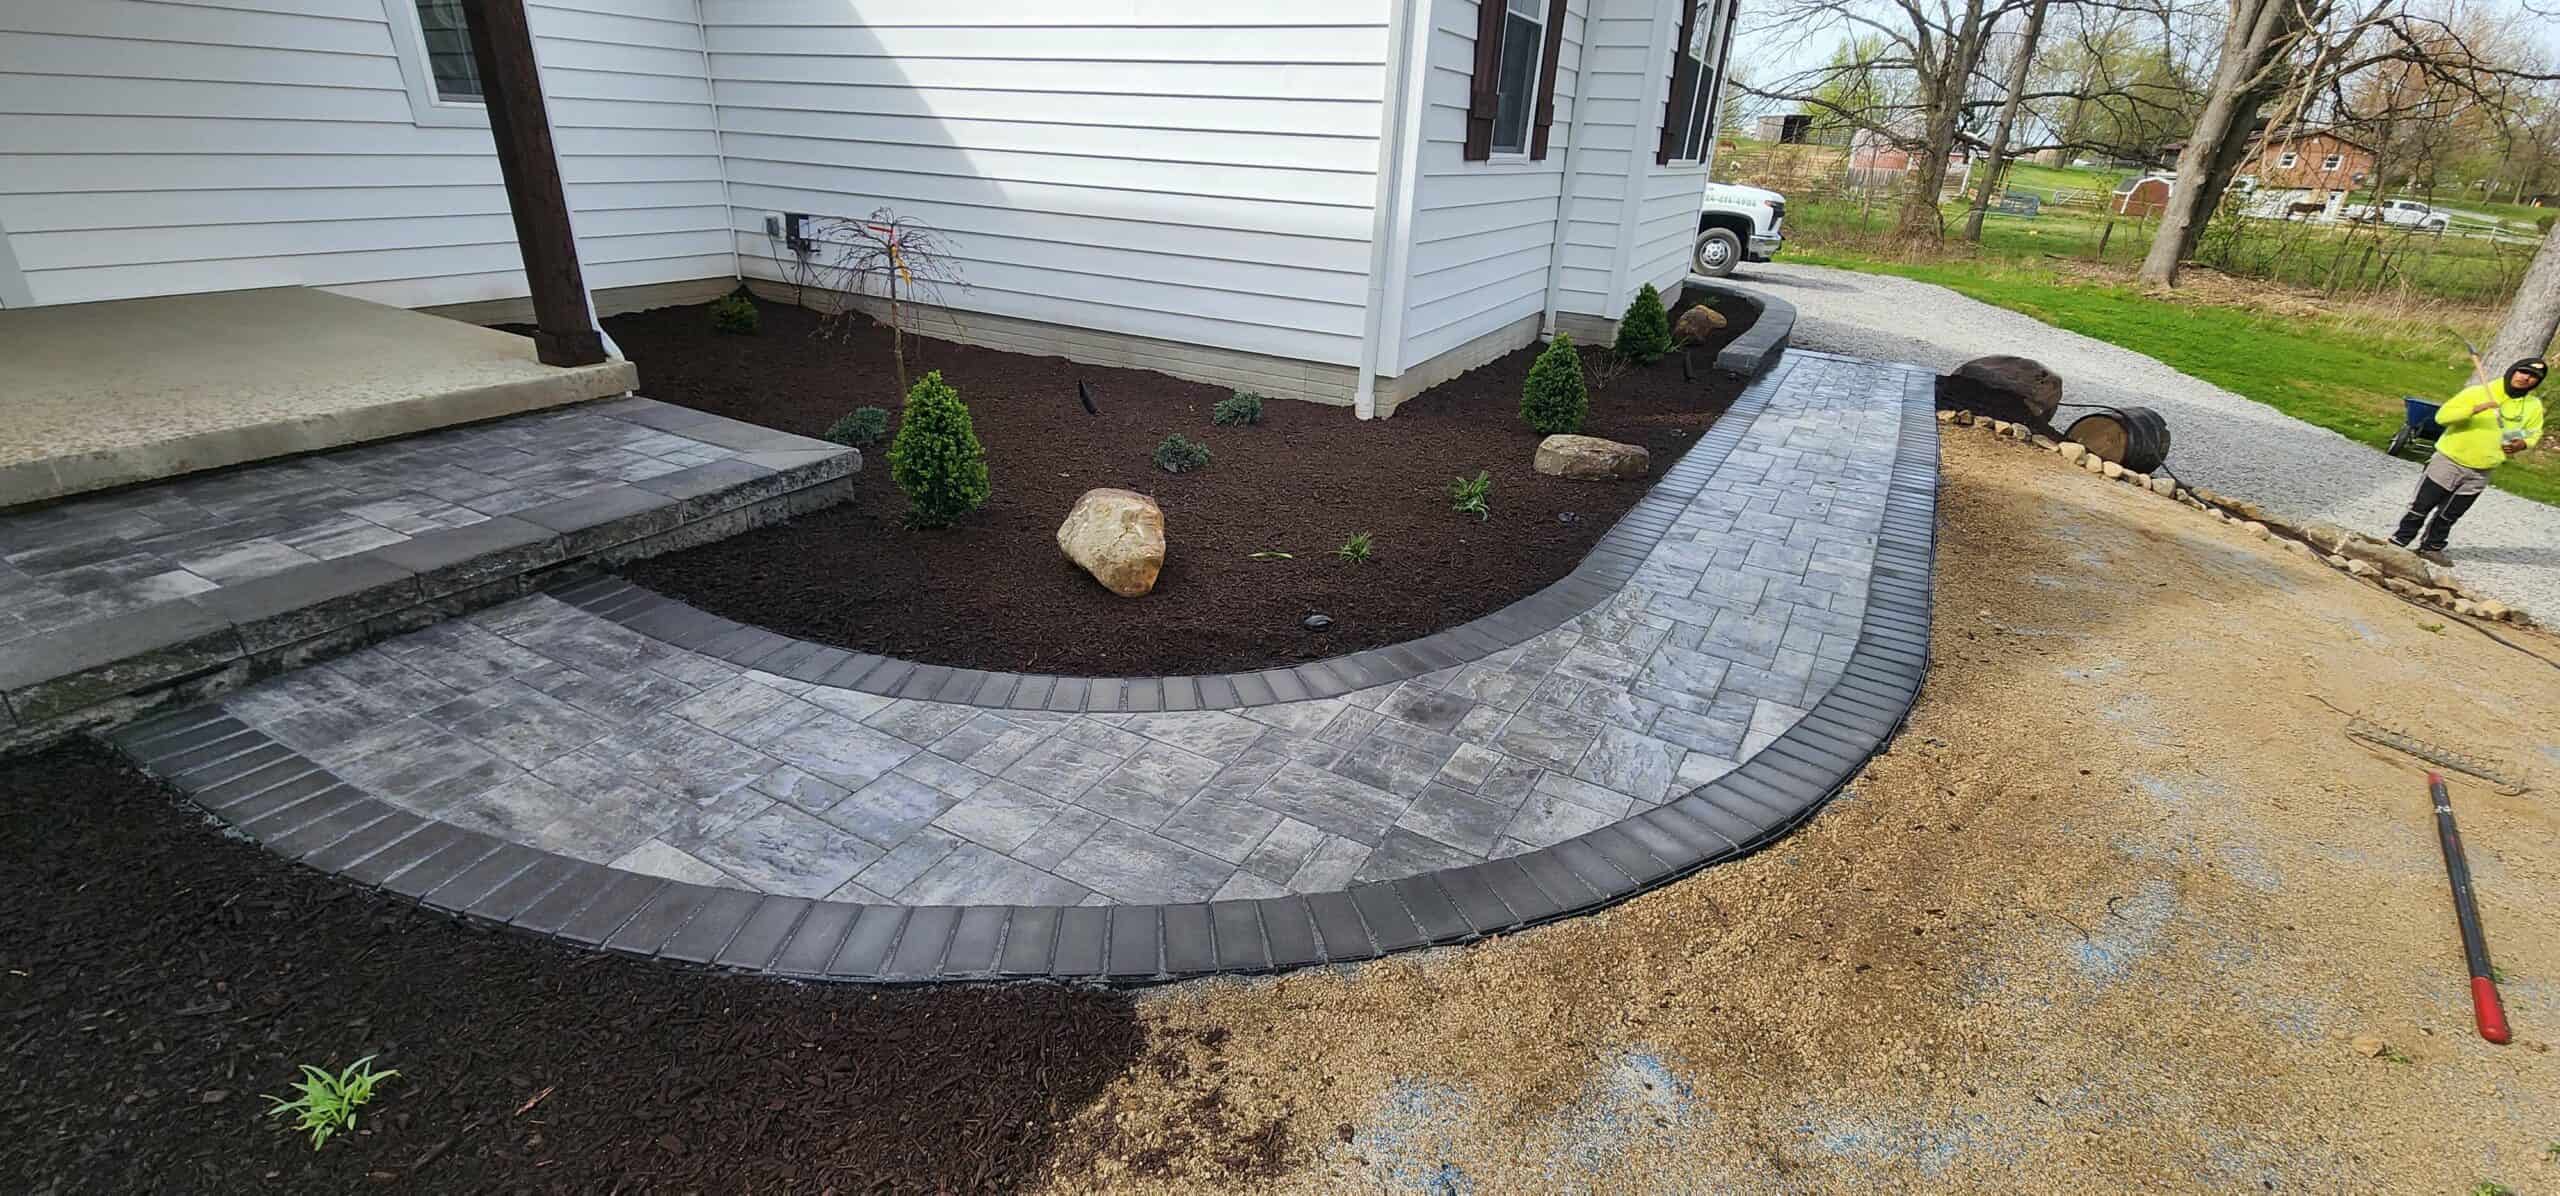 Begin hardscaping projects with professional designers familiar with the latest trends